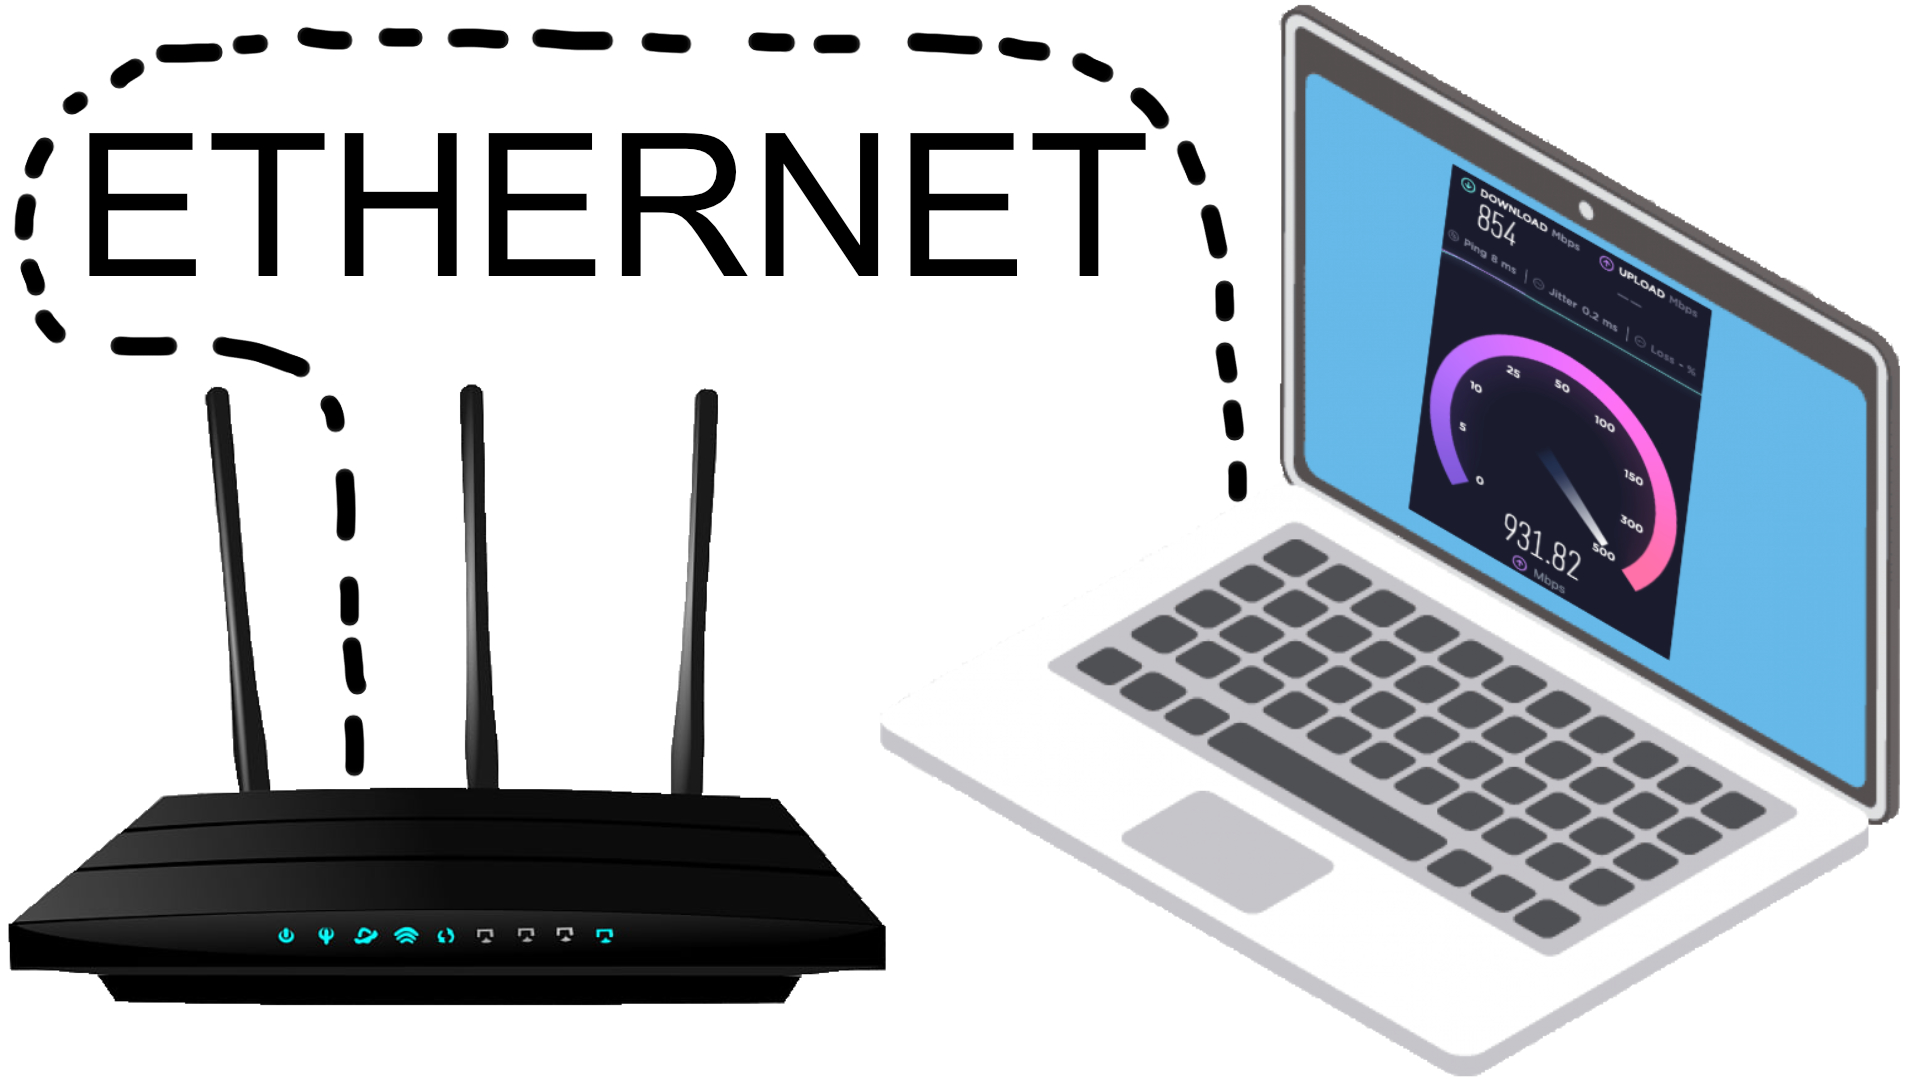 Wi-Fi Vs. Ethernet: How Much Better Is A Wired Connection?